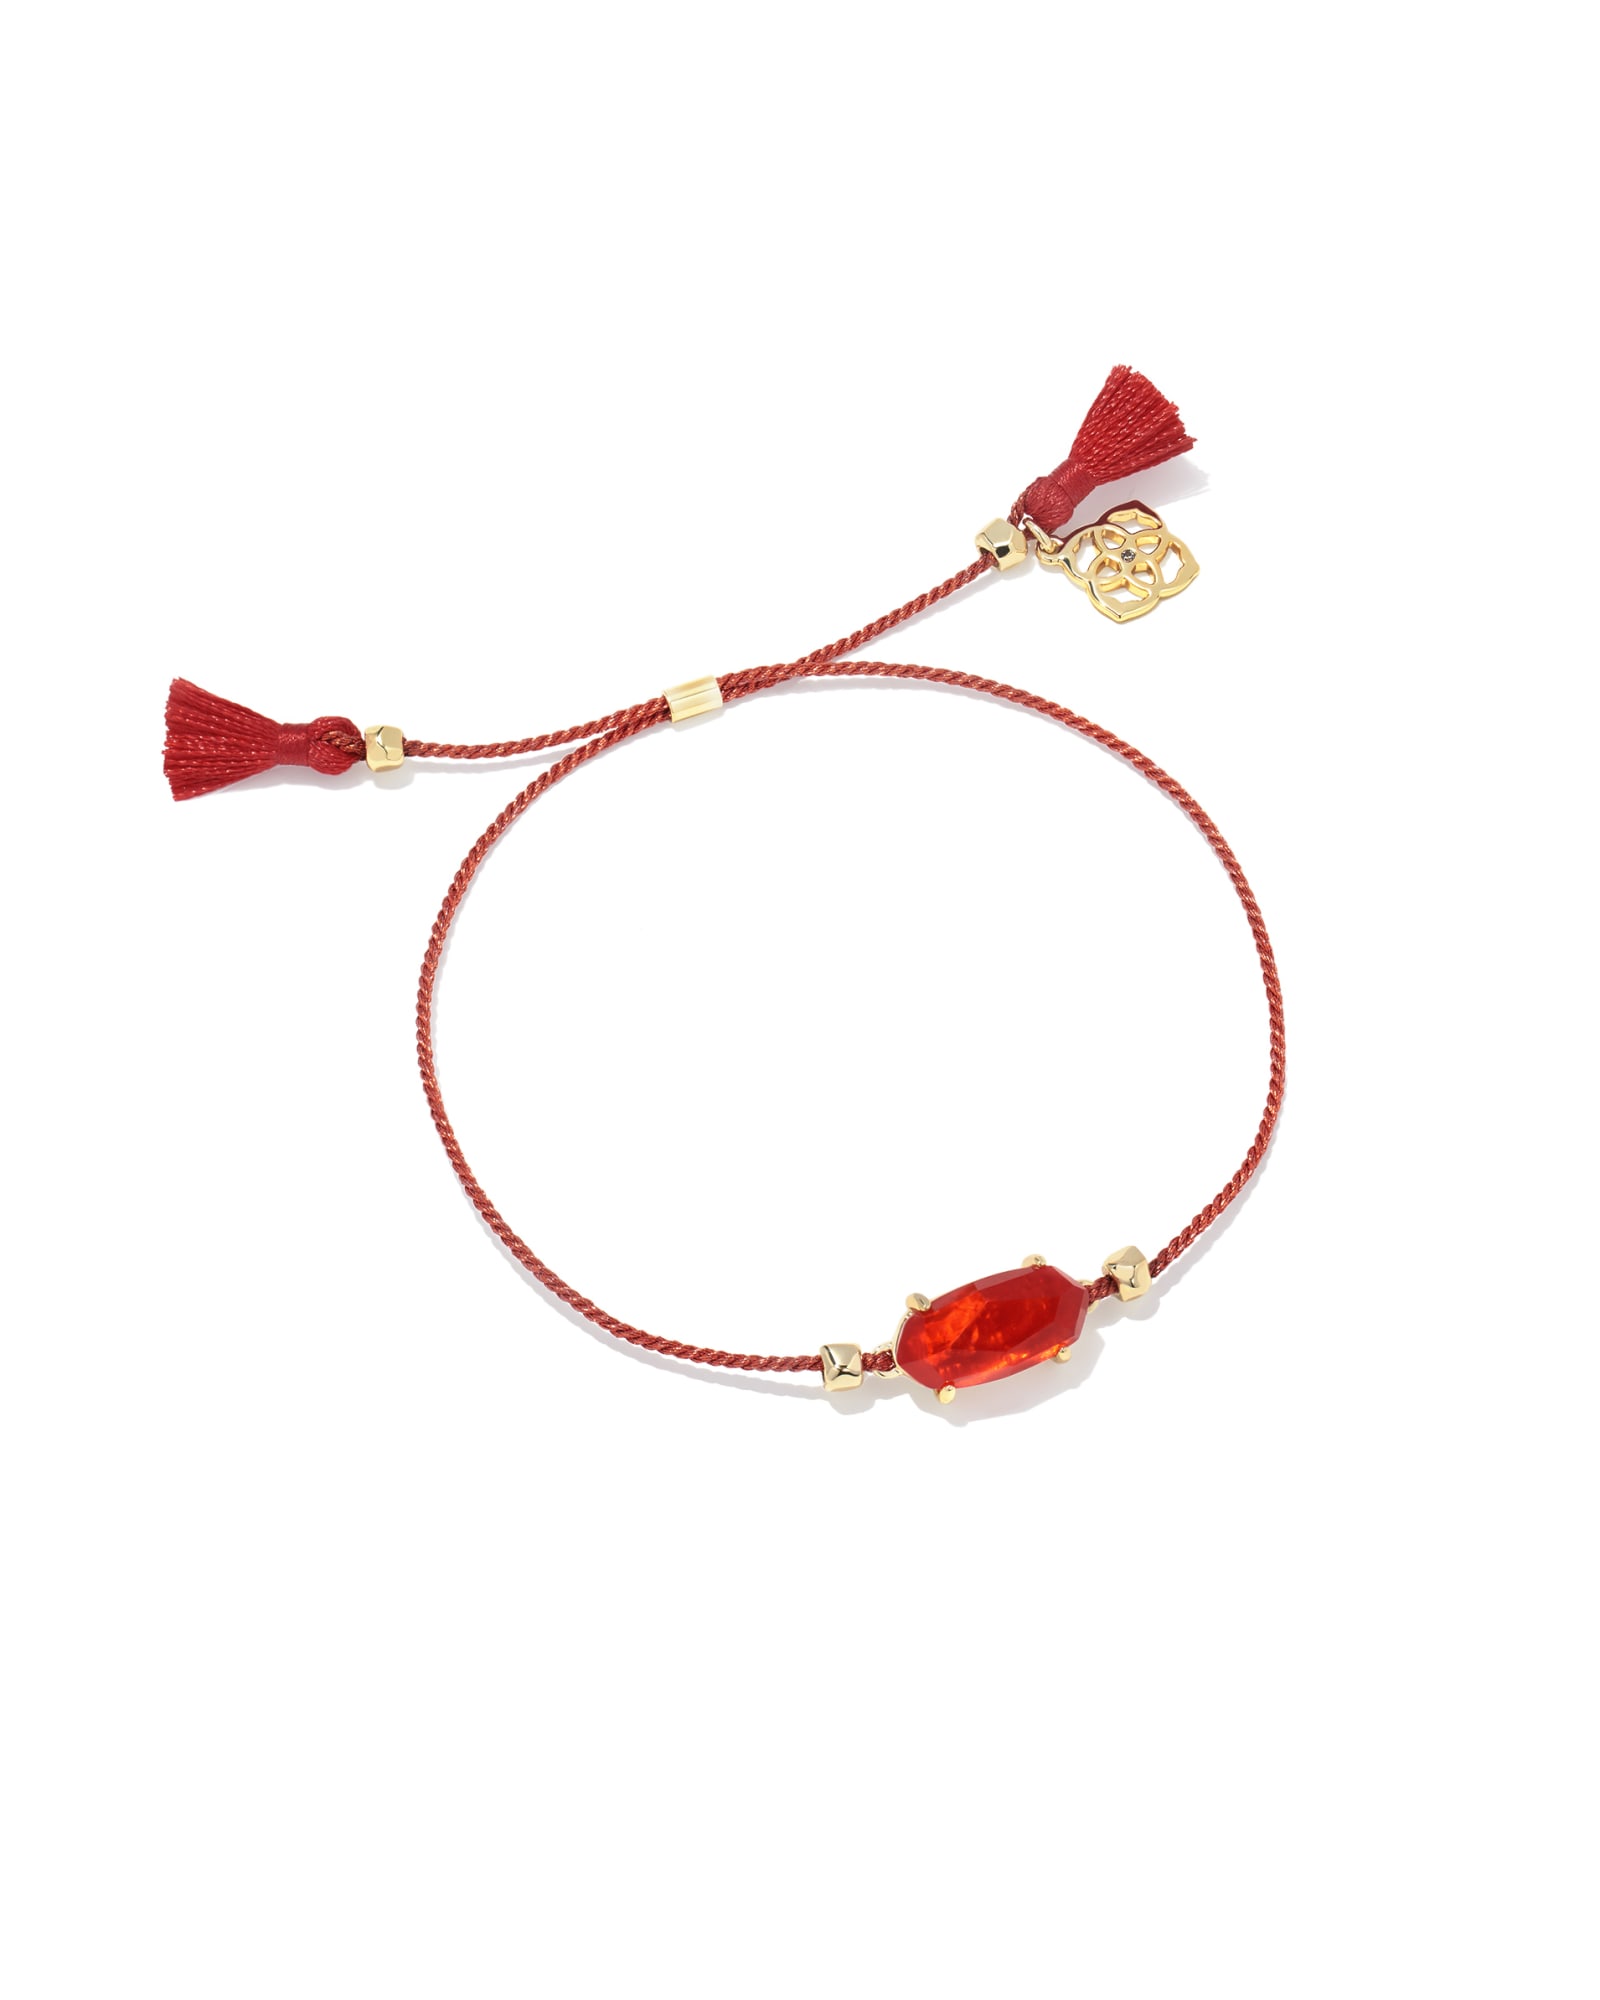 Kendra Scott Everlyne Red Cord Friendship Bracelet in Red Illusion | Mother Of Pearl/Glass